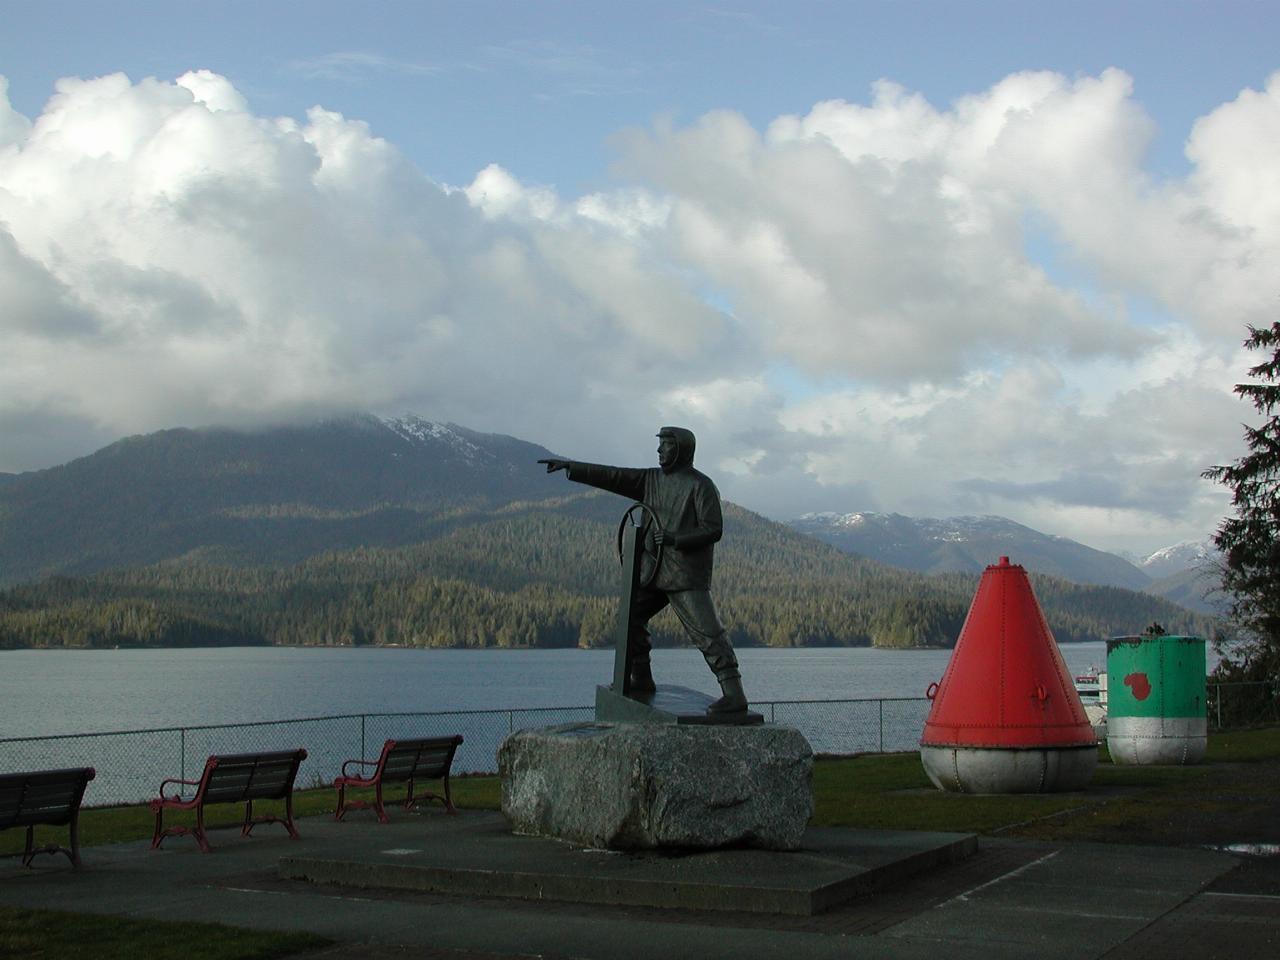 Statue commemorating mariners lost at sea